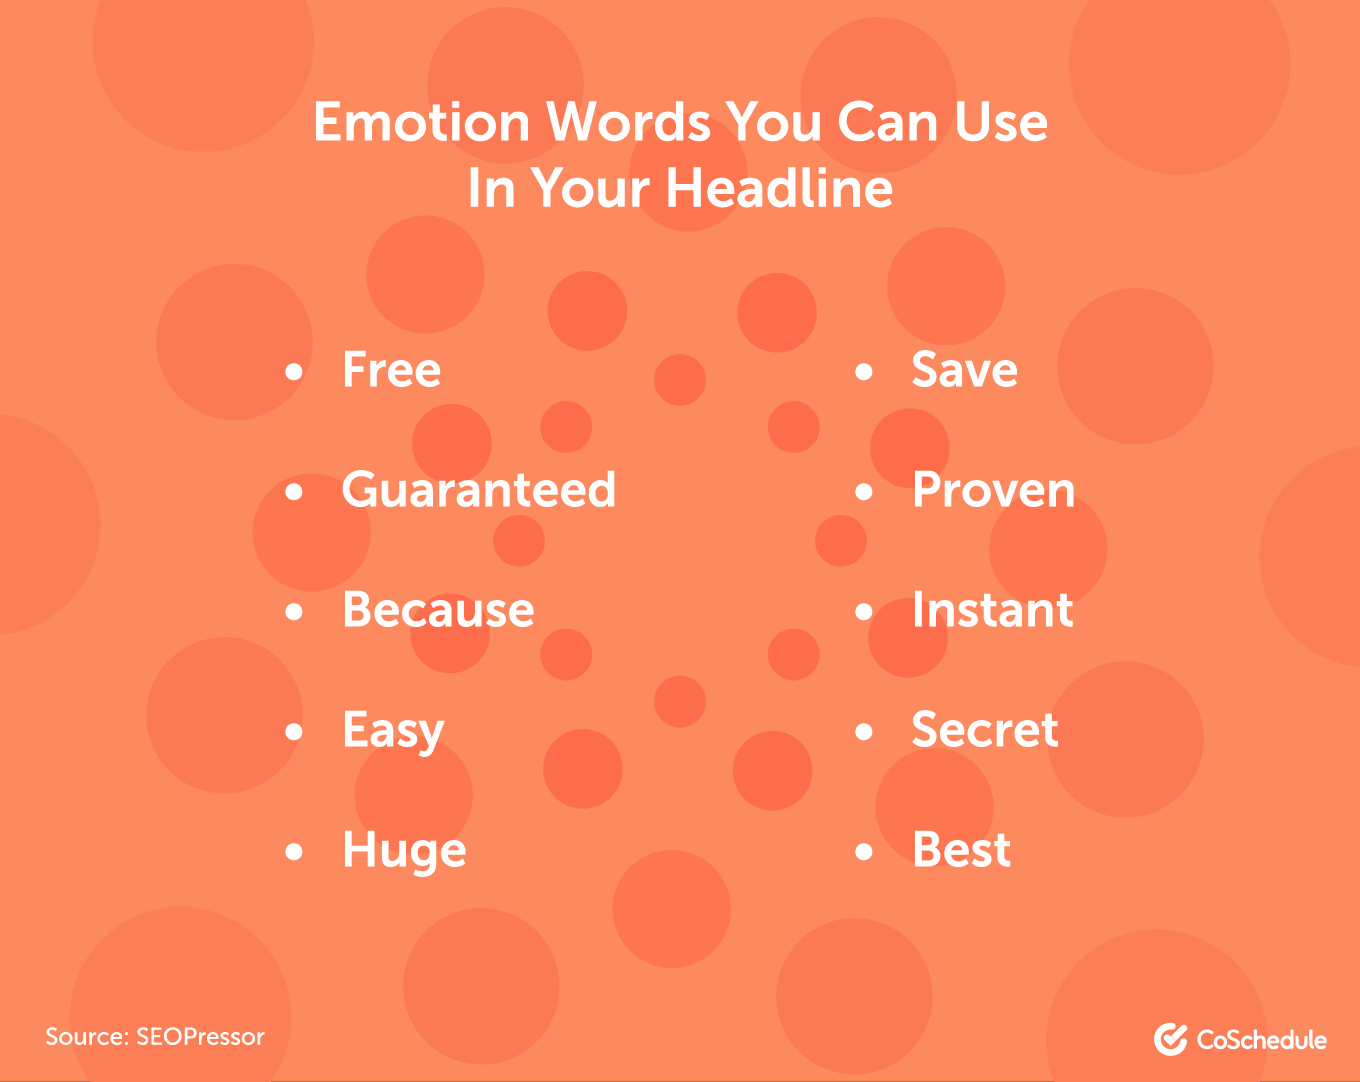 Emotion words for headlines